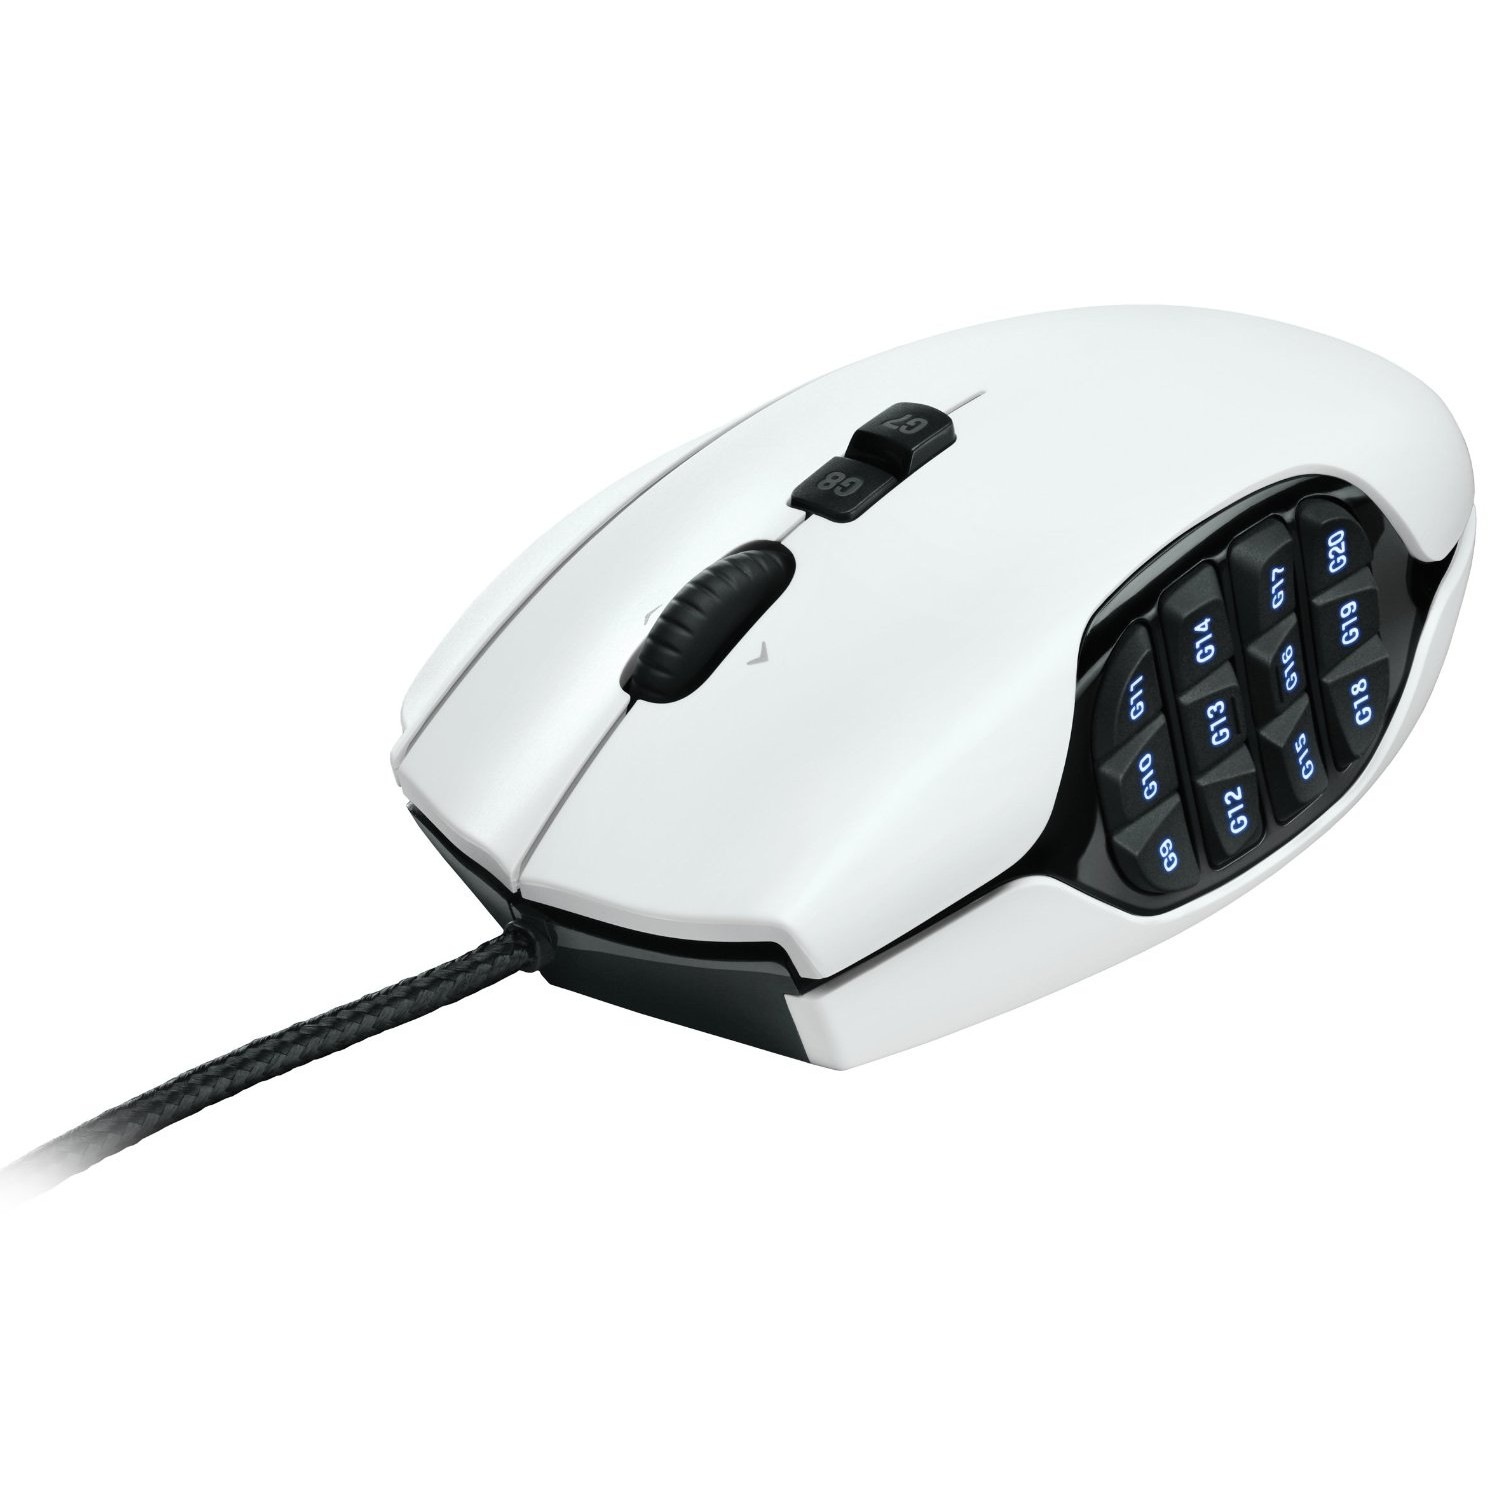 Logitech G600 MMO White Gaming Mouse-4